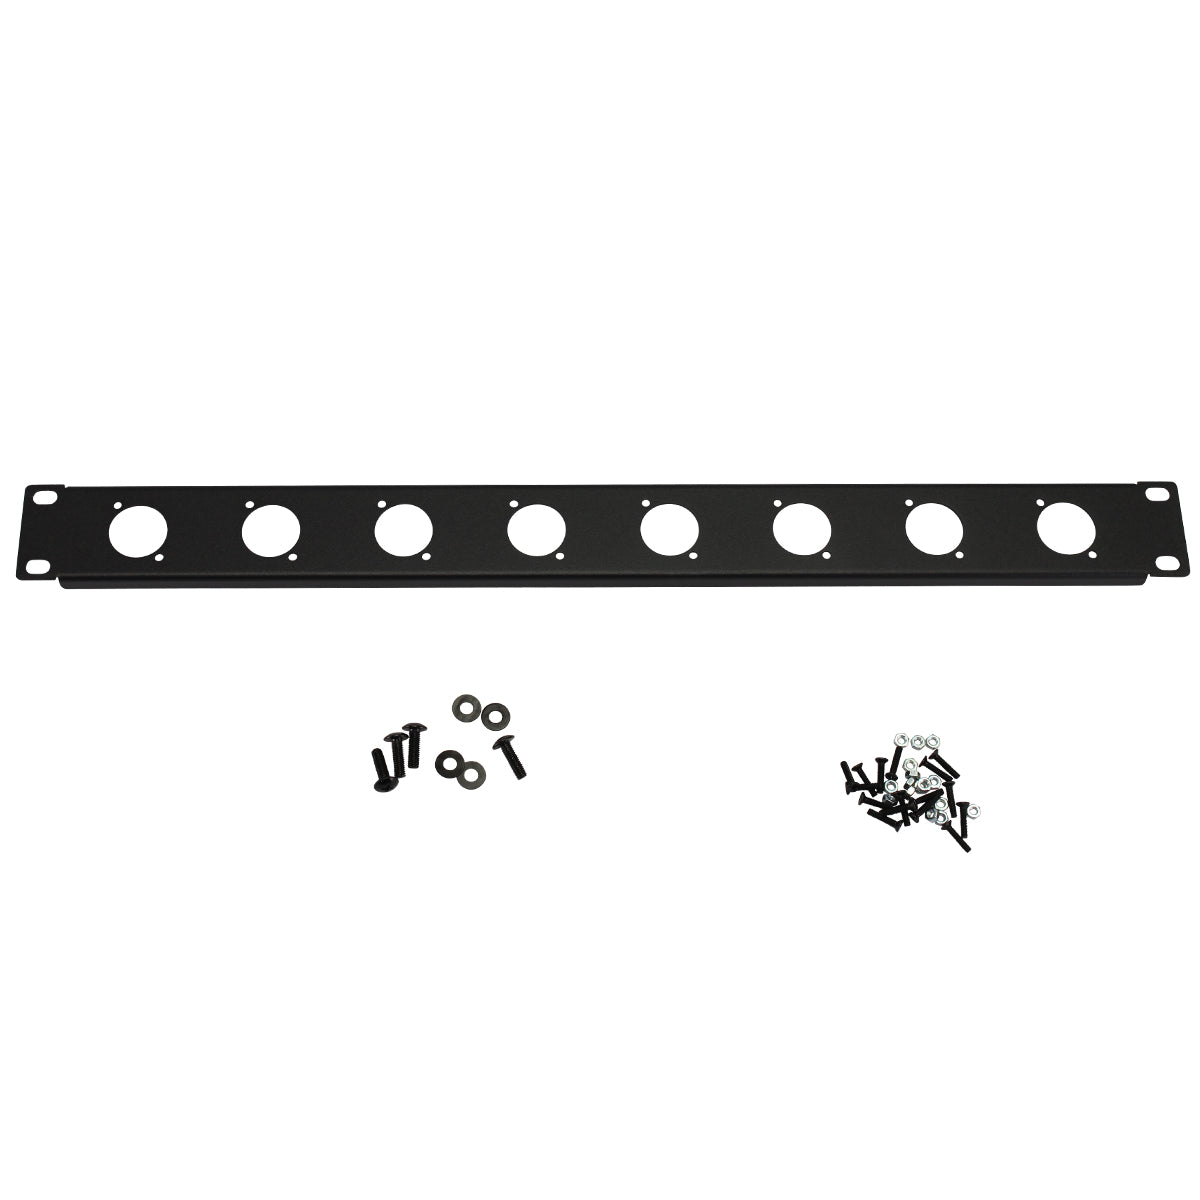 1U Rack Metal Blanking Panel w/ 8 Round Holes for 19in Server Racks and Cabinets